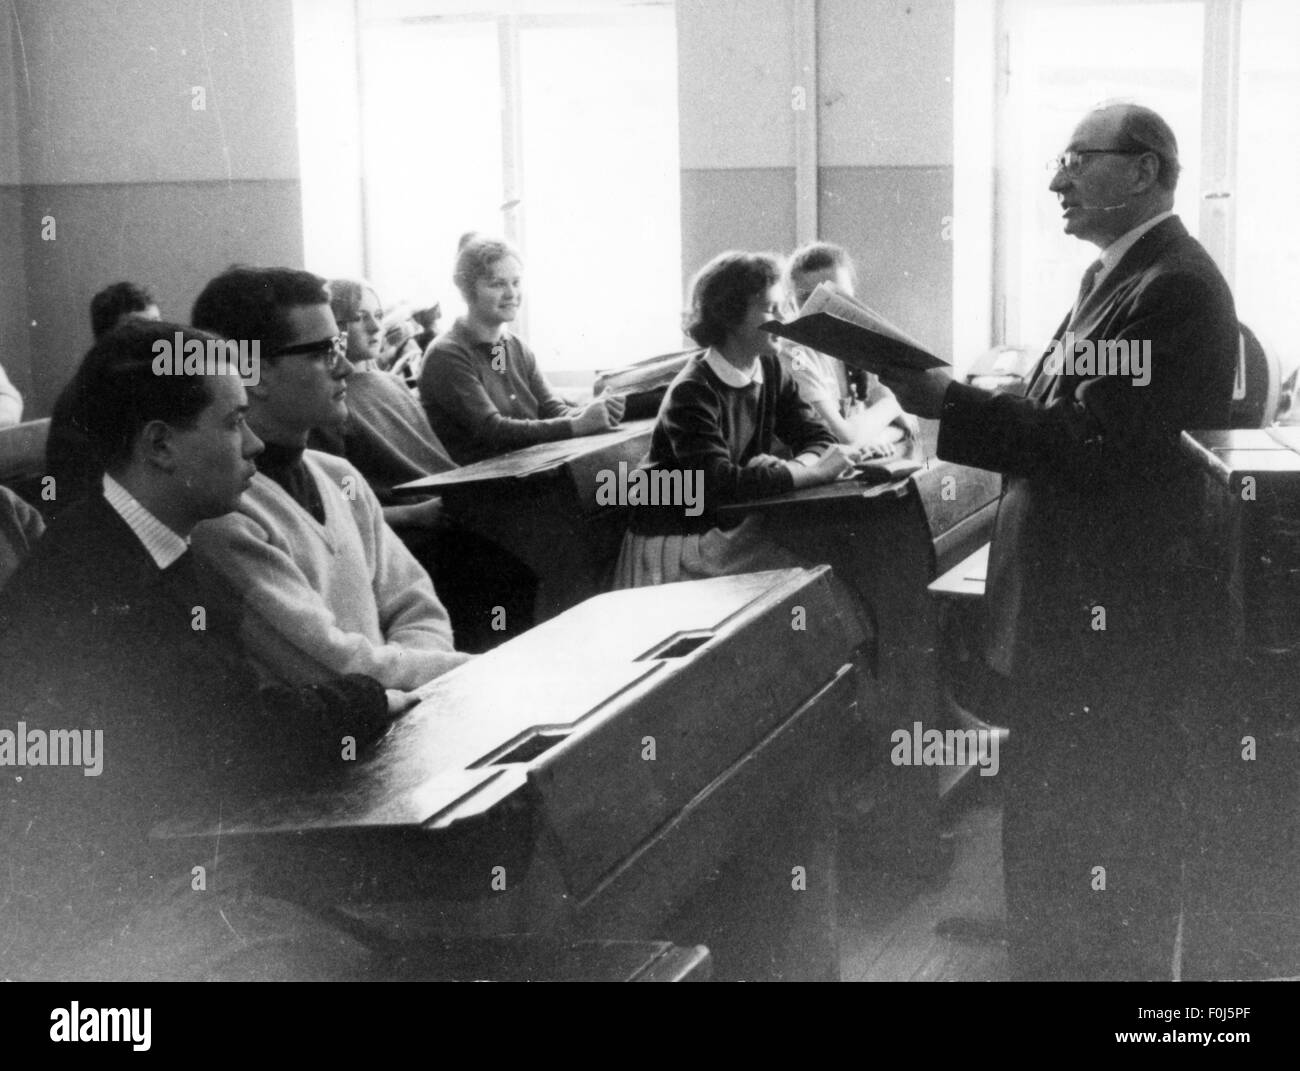 pedagogy, school / lessons / discipline, evening classes, 1964, Additional-Rights-Clearences-Not Available Stock Photo